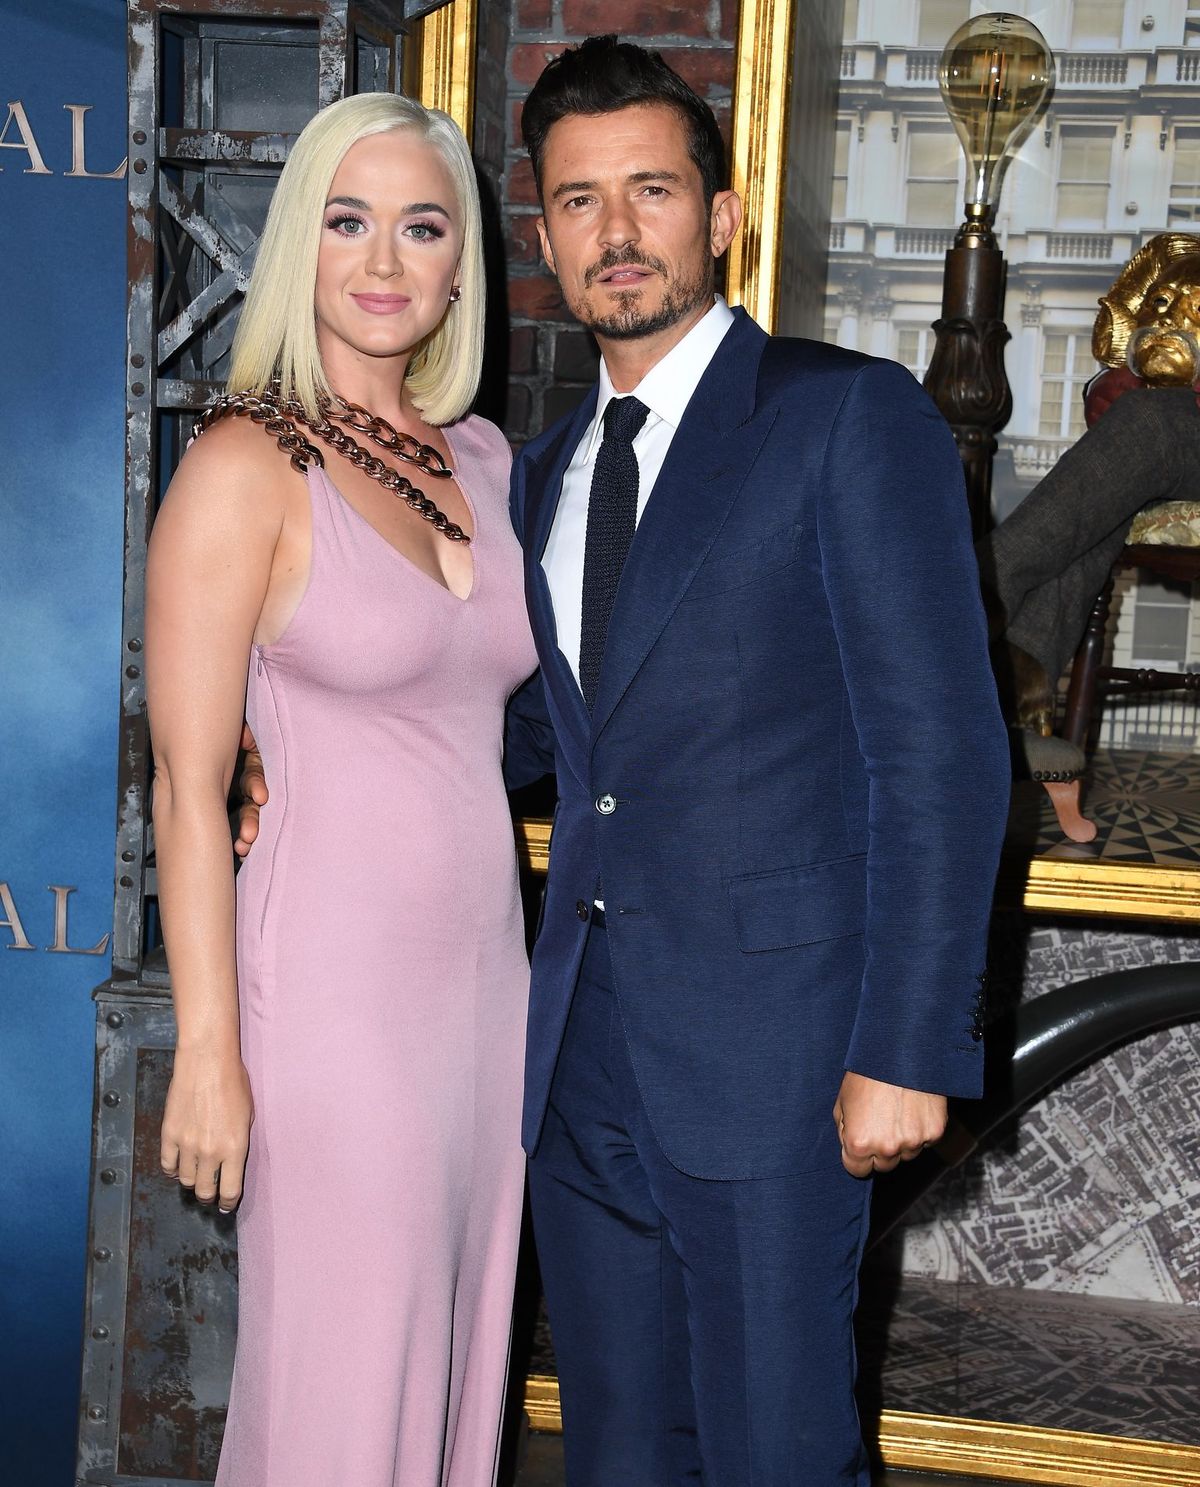 Katy Perry and Orlando Bloom at the Los Angeles premiere of "Carnival Row" on August 21, 2019, in Hollywood, California | Photo: Steve Granitz/WireImage/Getty Images